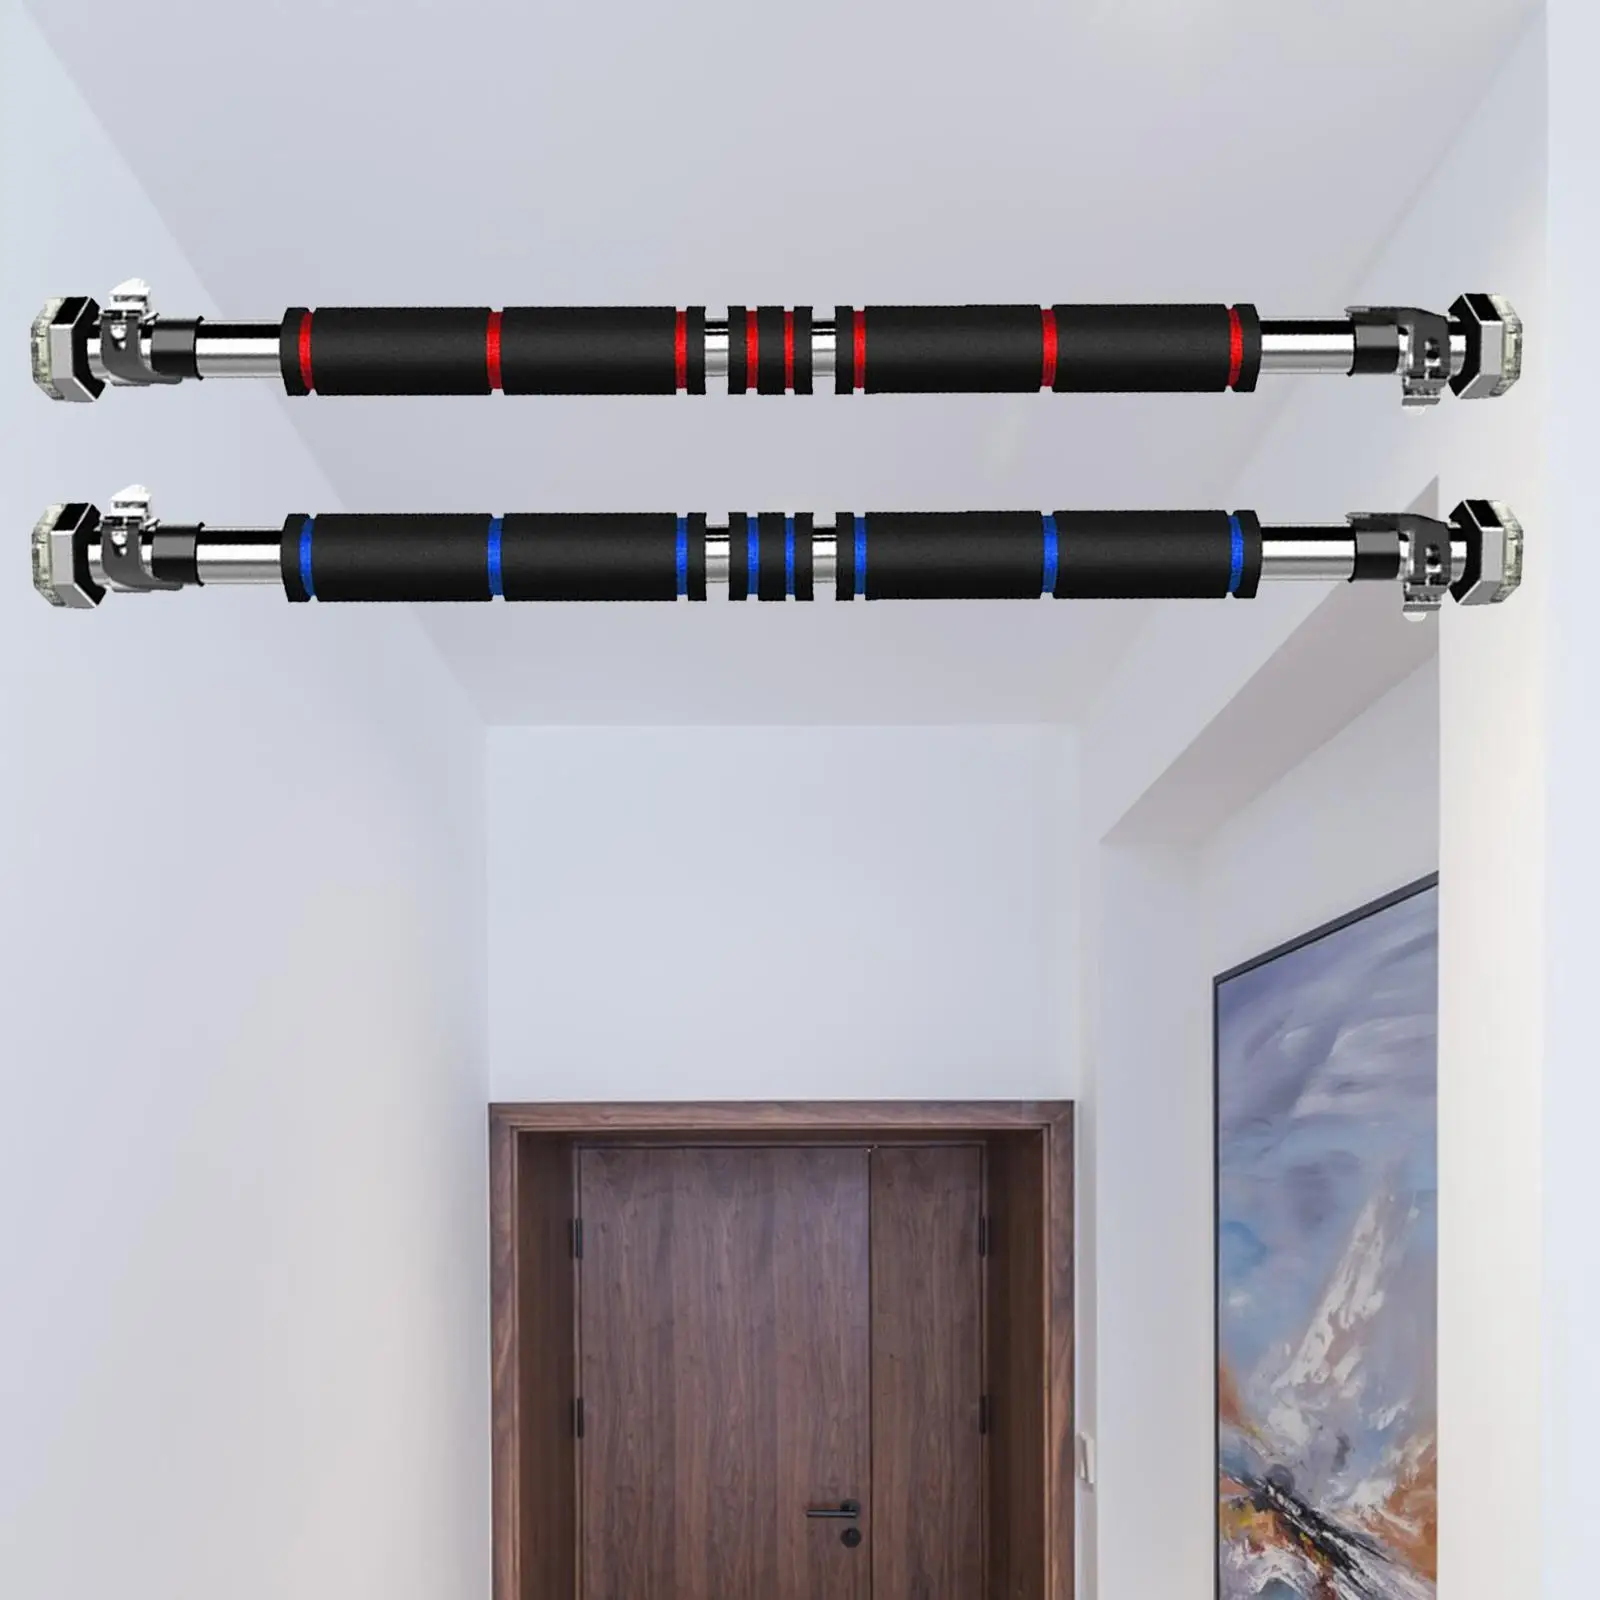 Pull up Bar 31.5 to 51.2 Inches Adjustable Length No Screws Doorway Chin up Bar